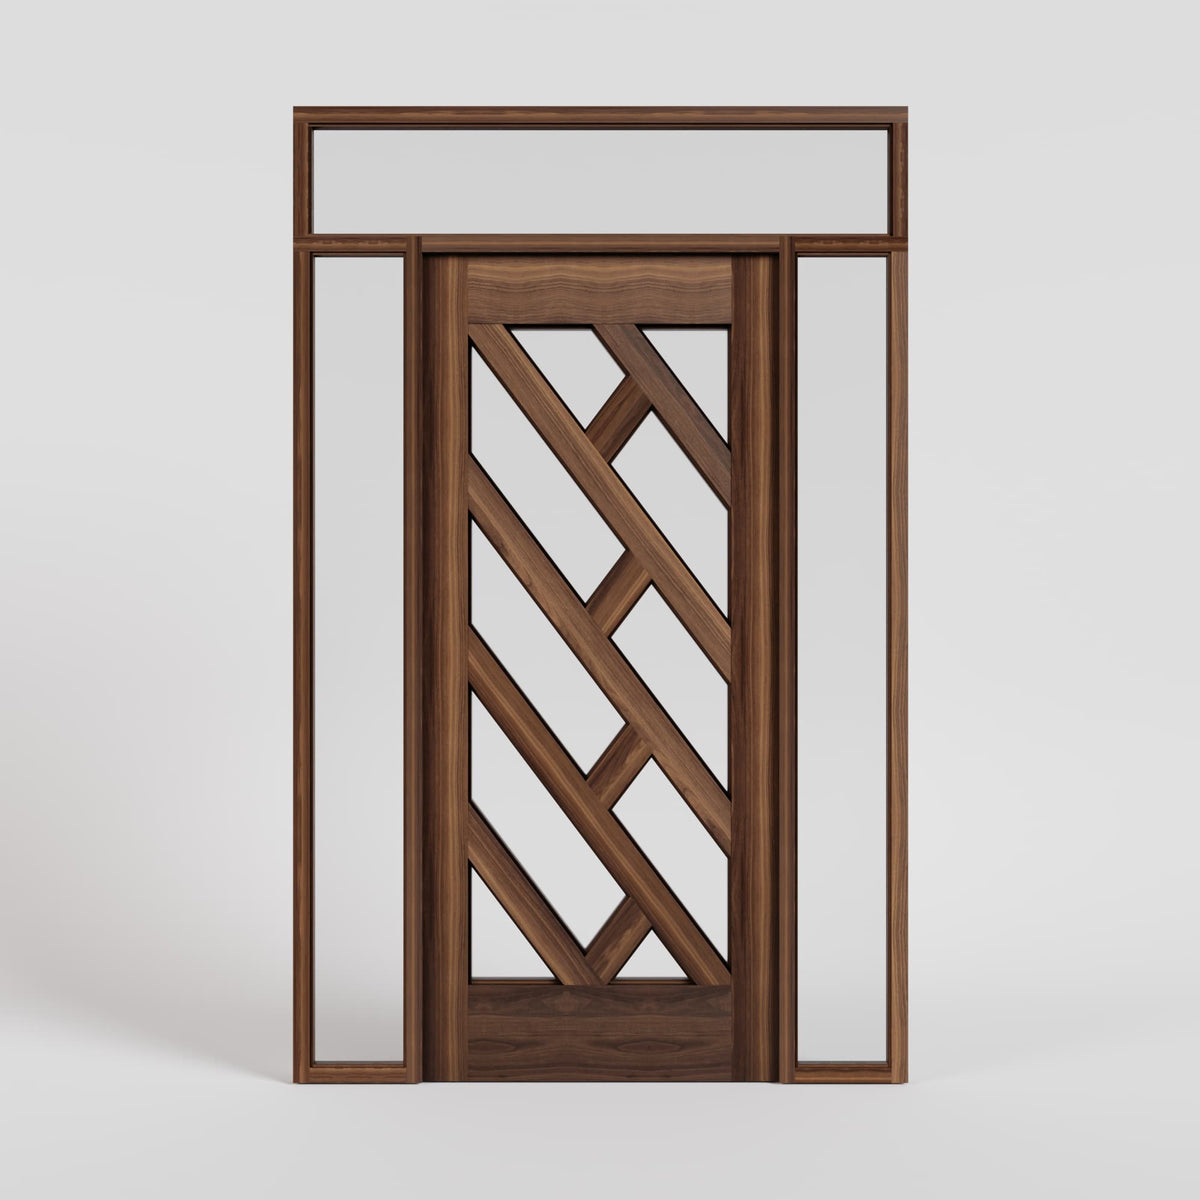 Zuma Diagonal Glass Front Door with sidelights and transom in black walnut wood